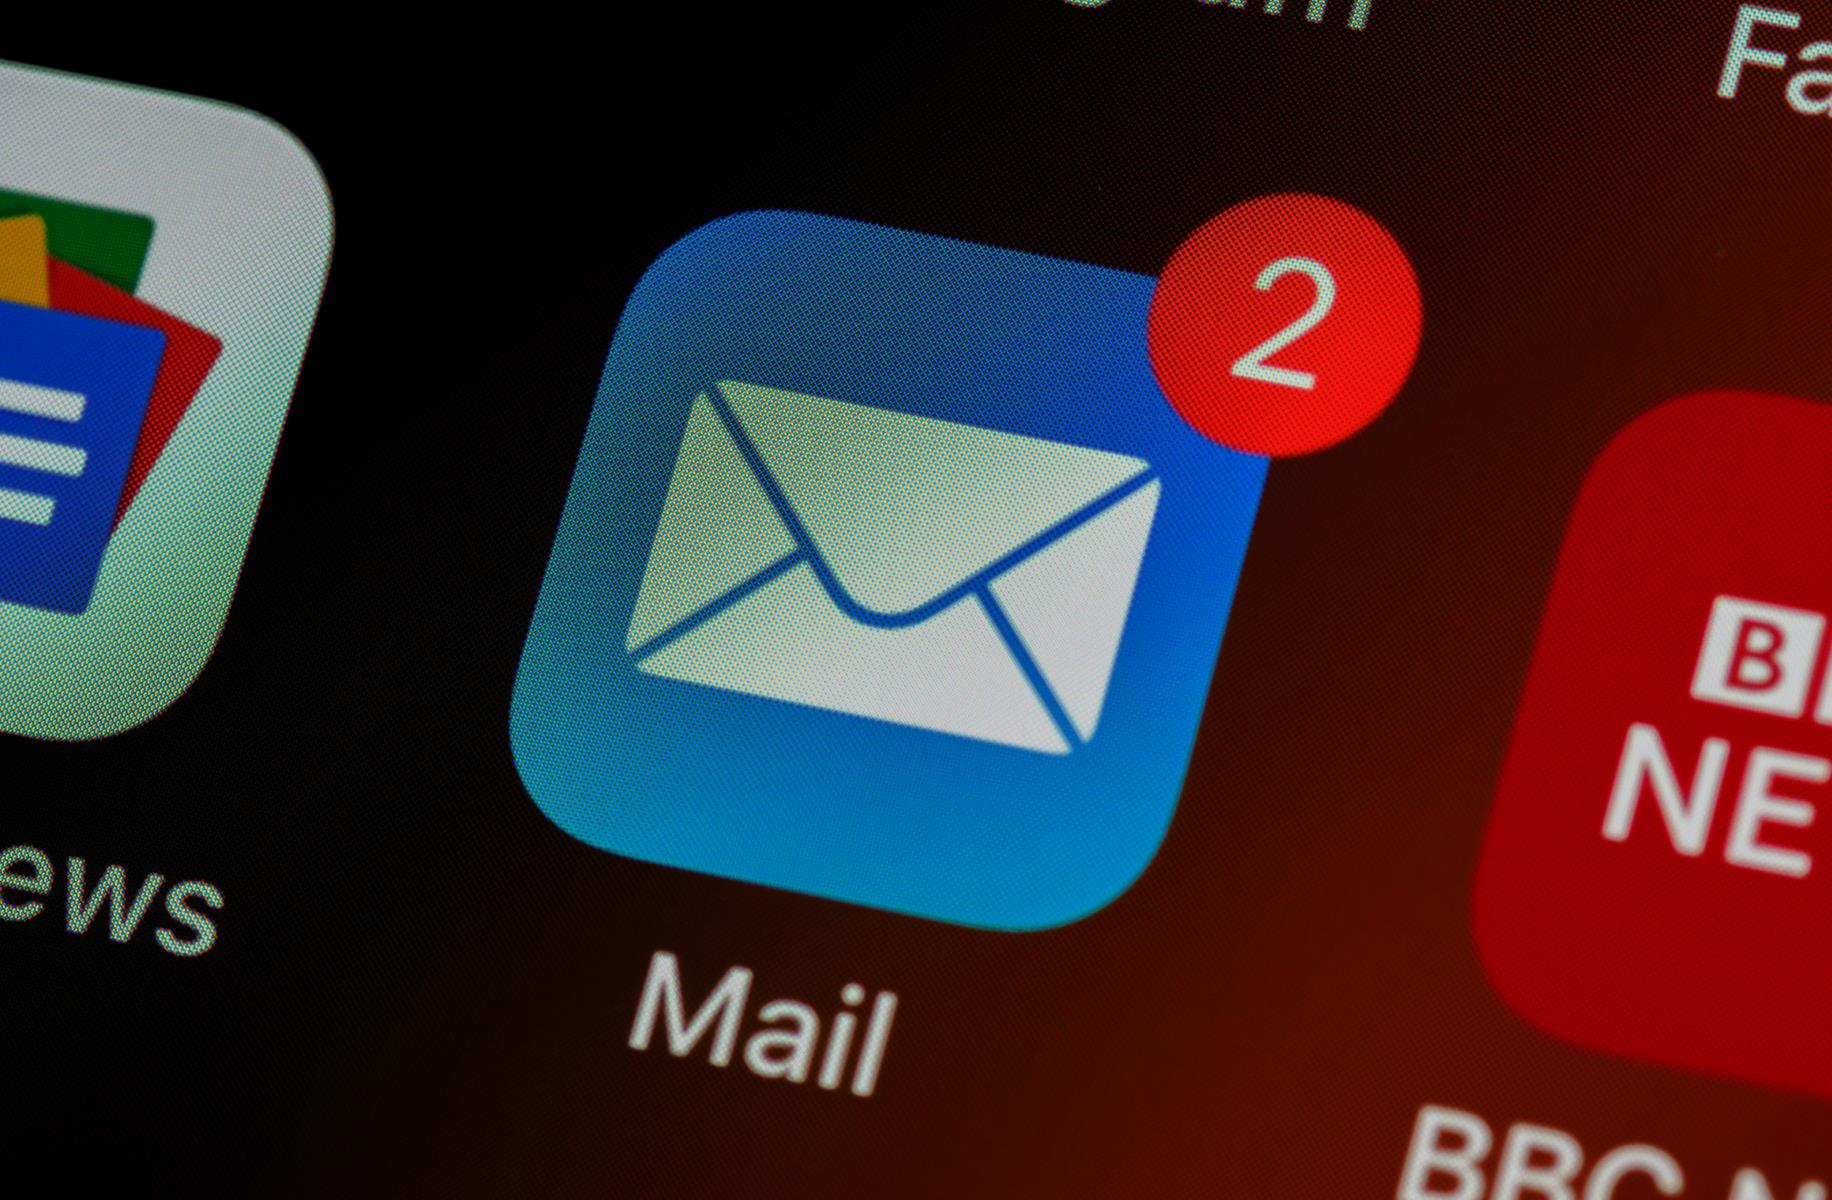 How To Block Email On Iphone